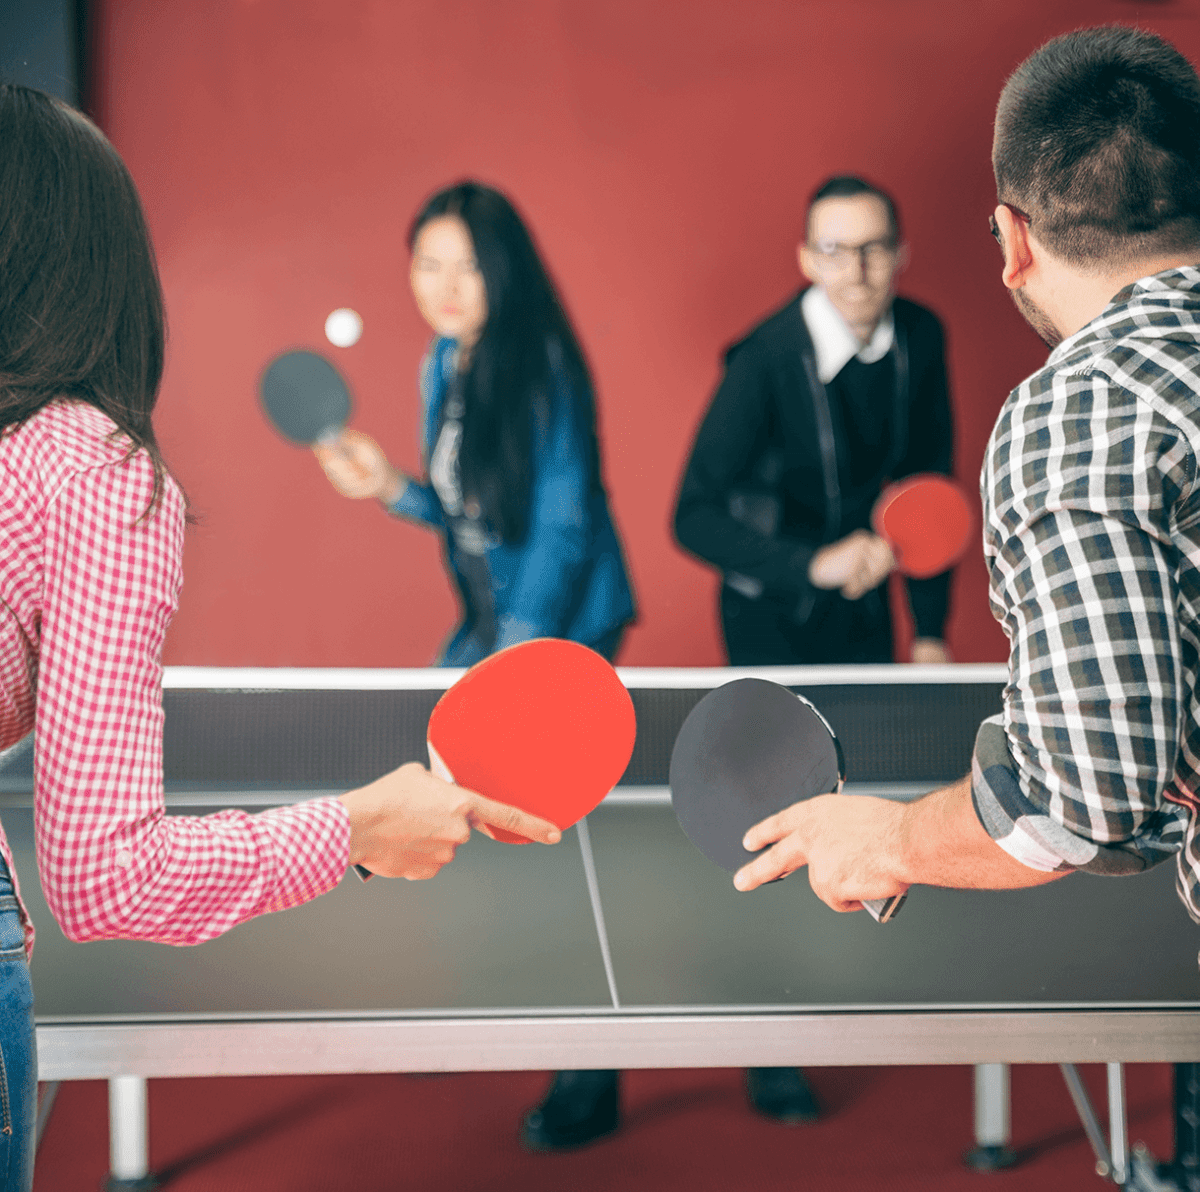 Four people play ping-pong